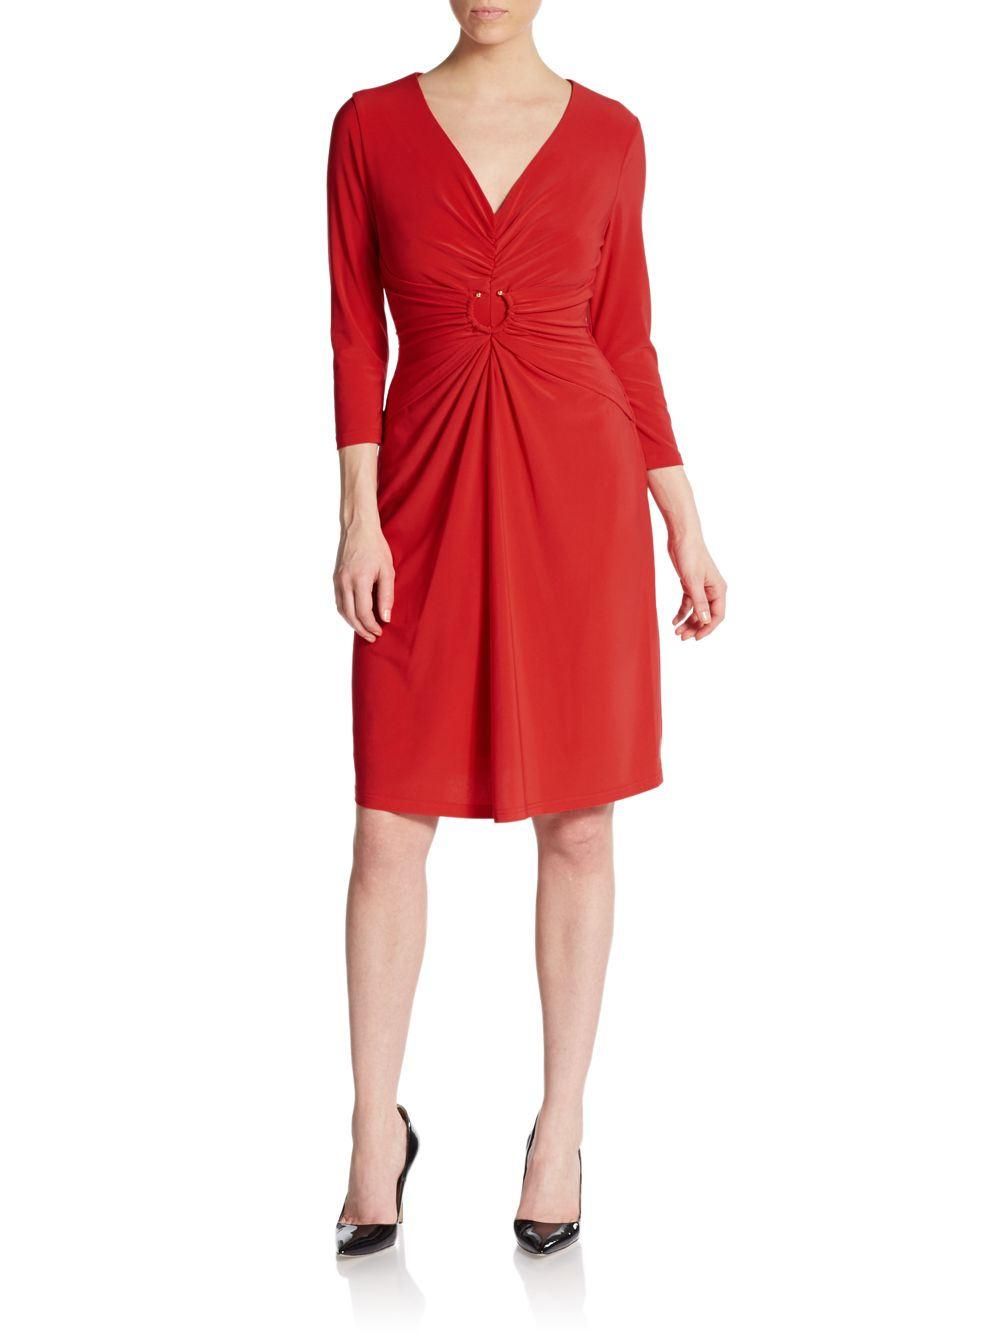 Saks fifth avenue black label Ruched Jersey Dress in Red | Lyst